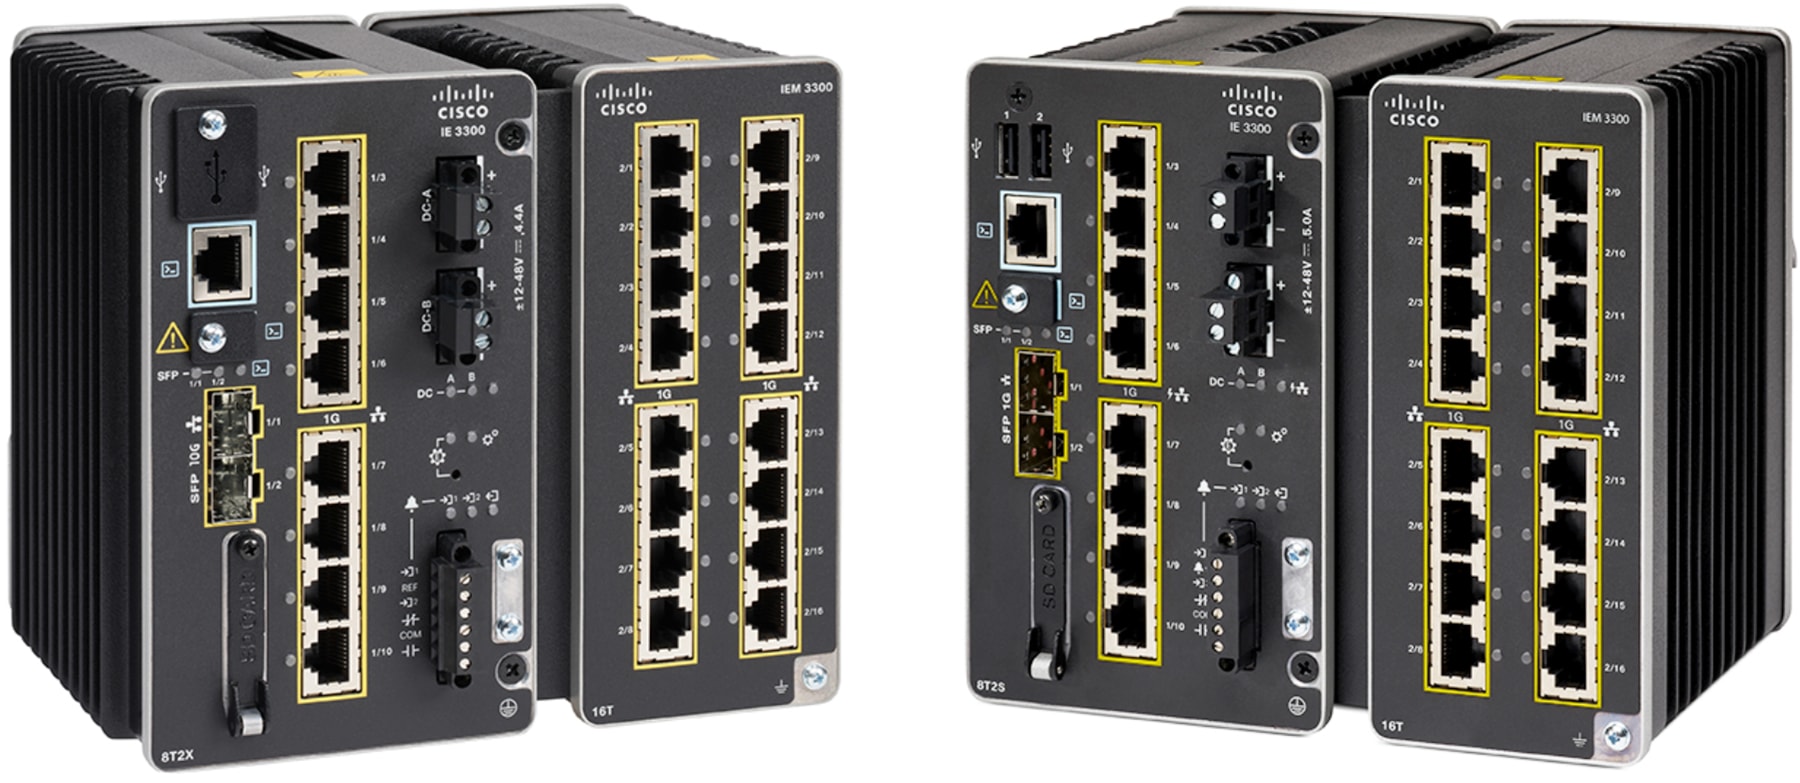 IE 3300 with 10G uplinks and IE 3300 with 1GE uplinks